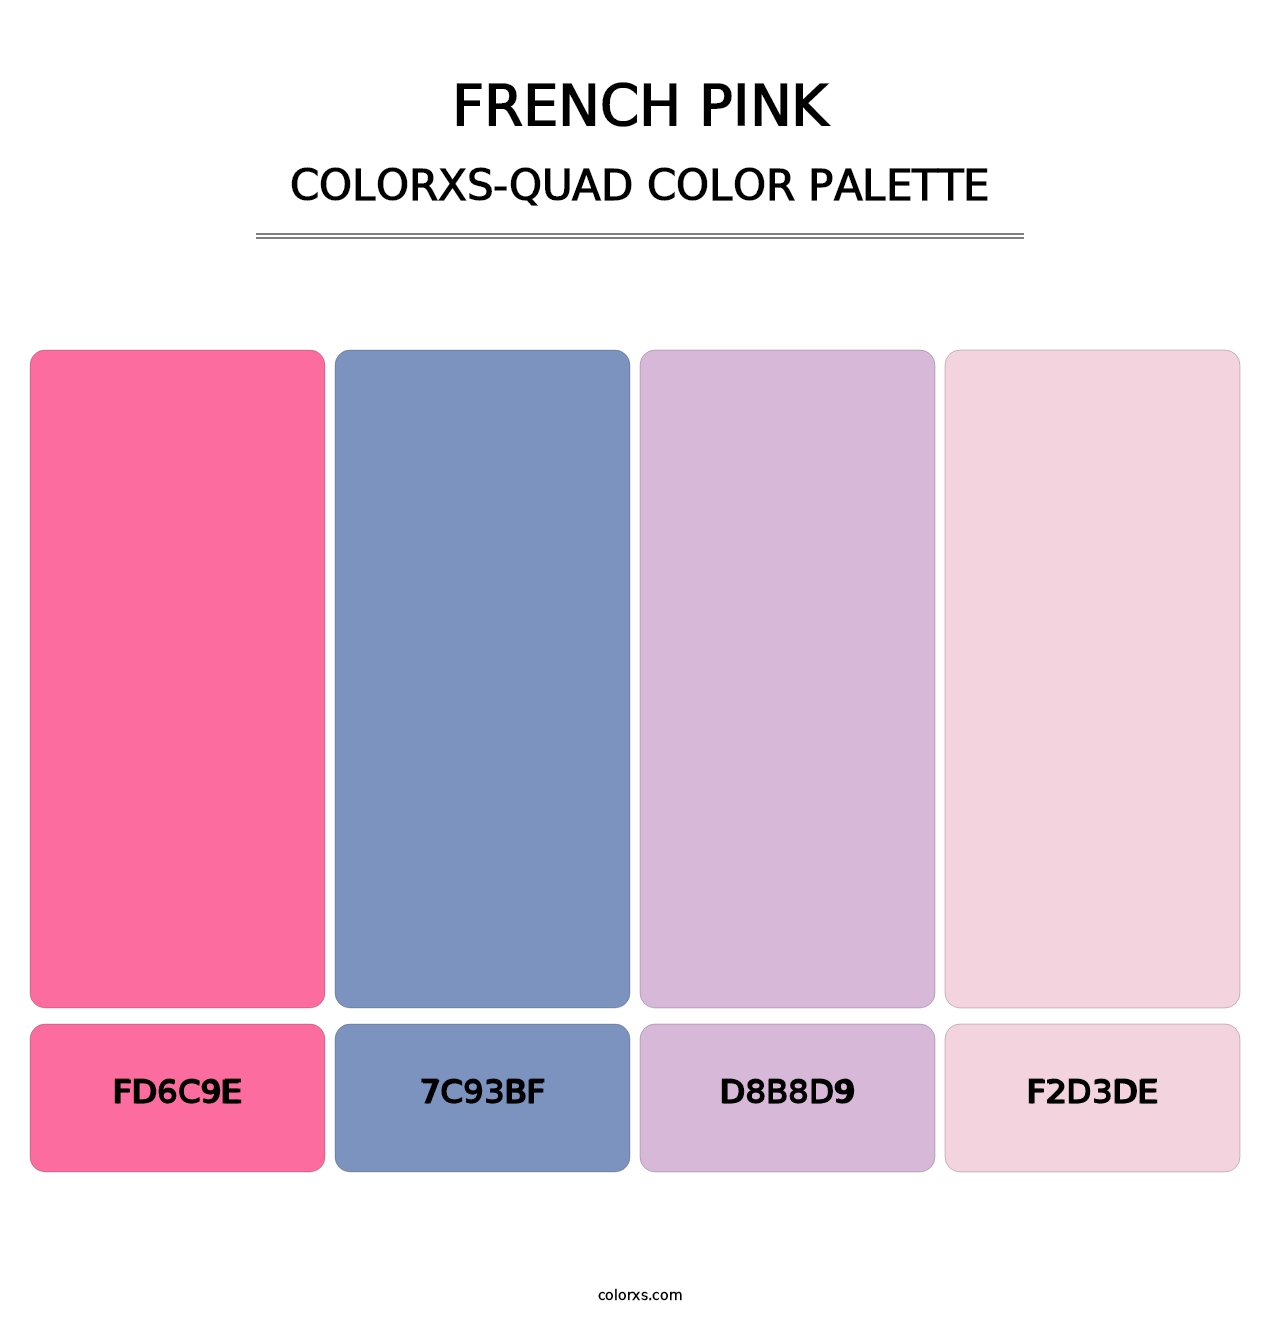 French Pink - Colorxs Quad Palette